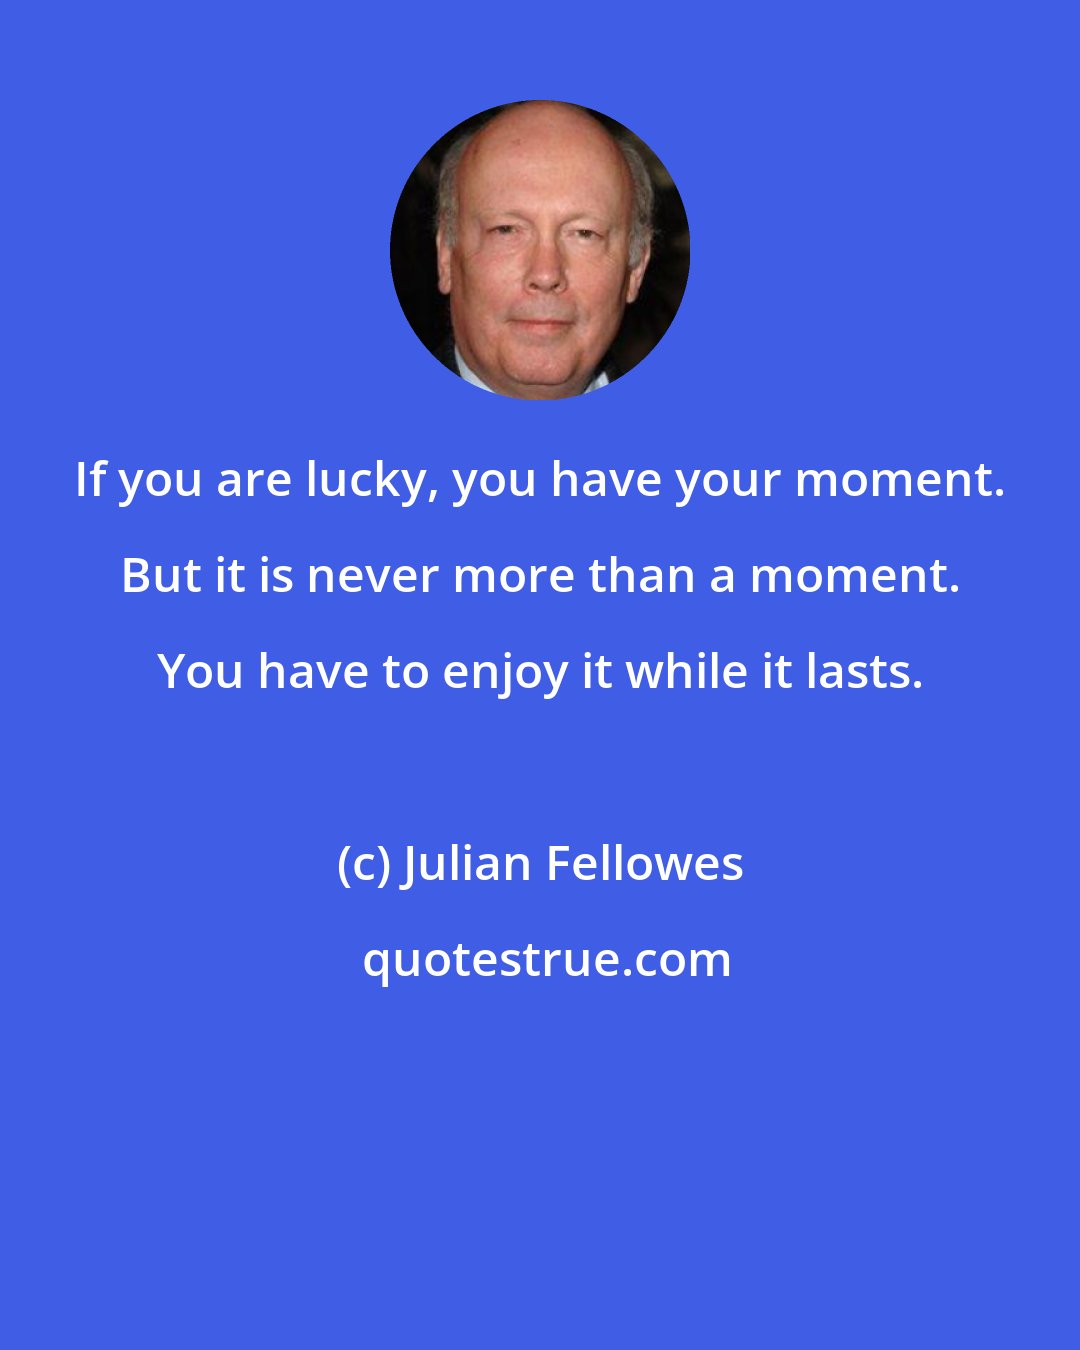 Julian Fellowes: If you are lucky, you have your moment. But it is never more than a moment. You have to enjoy it while it lasts.